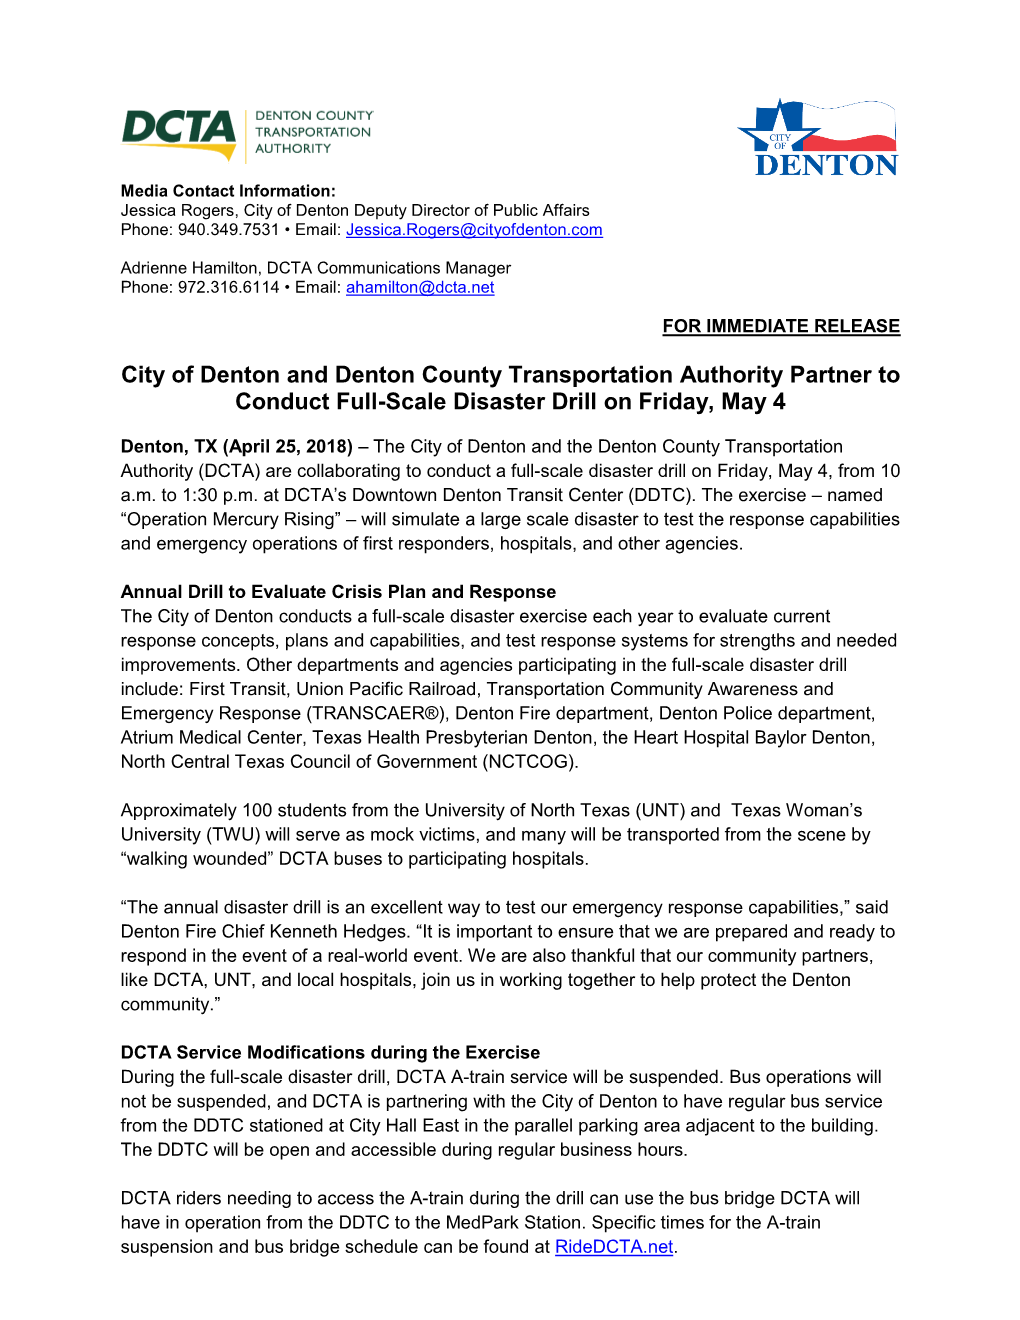 City of Denton and Denton County Transportation Authority Partner to Conduct Full-Scale Disaster Drill on Friday, May 4